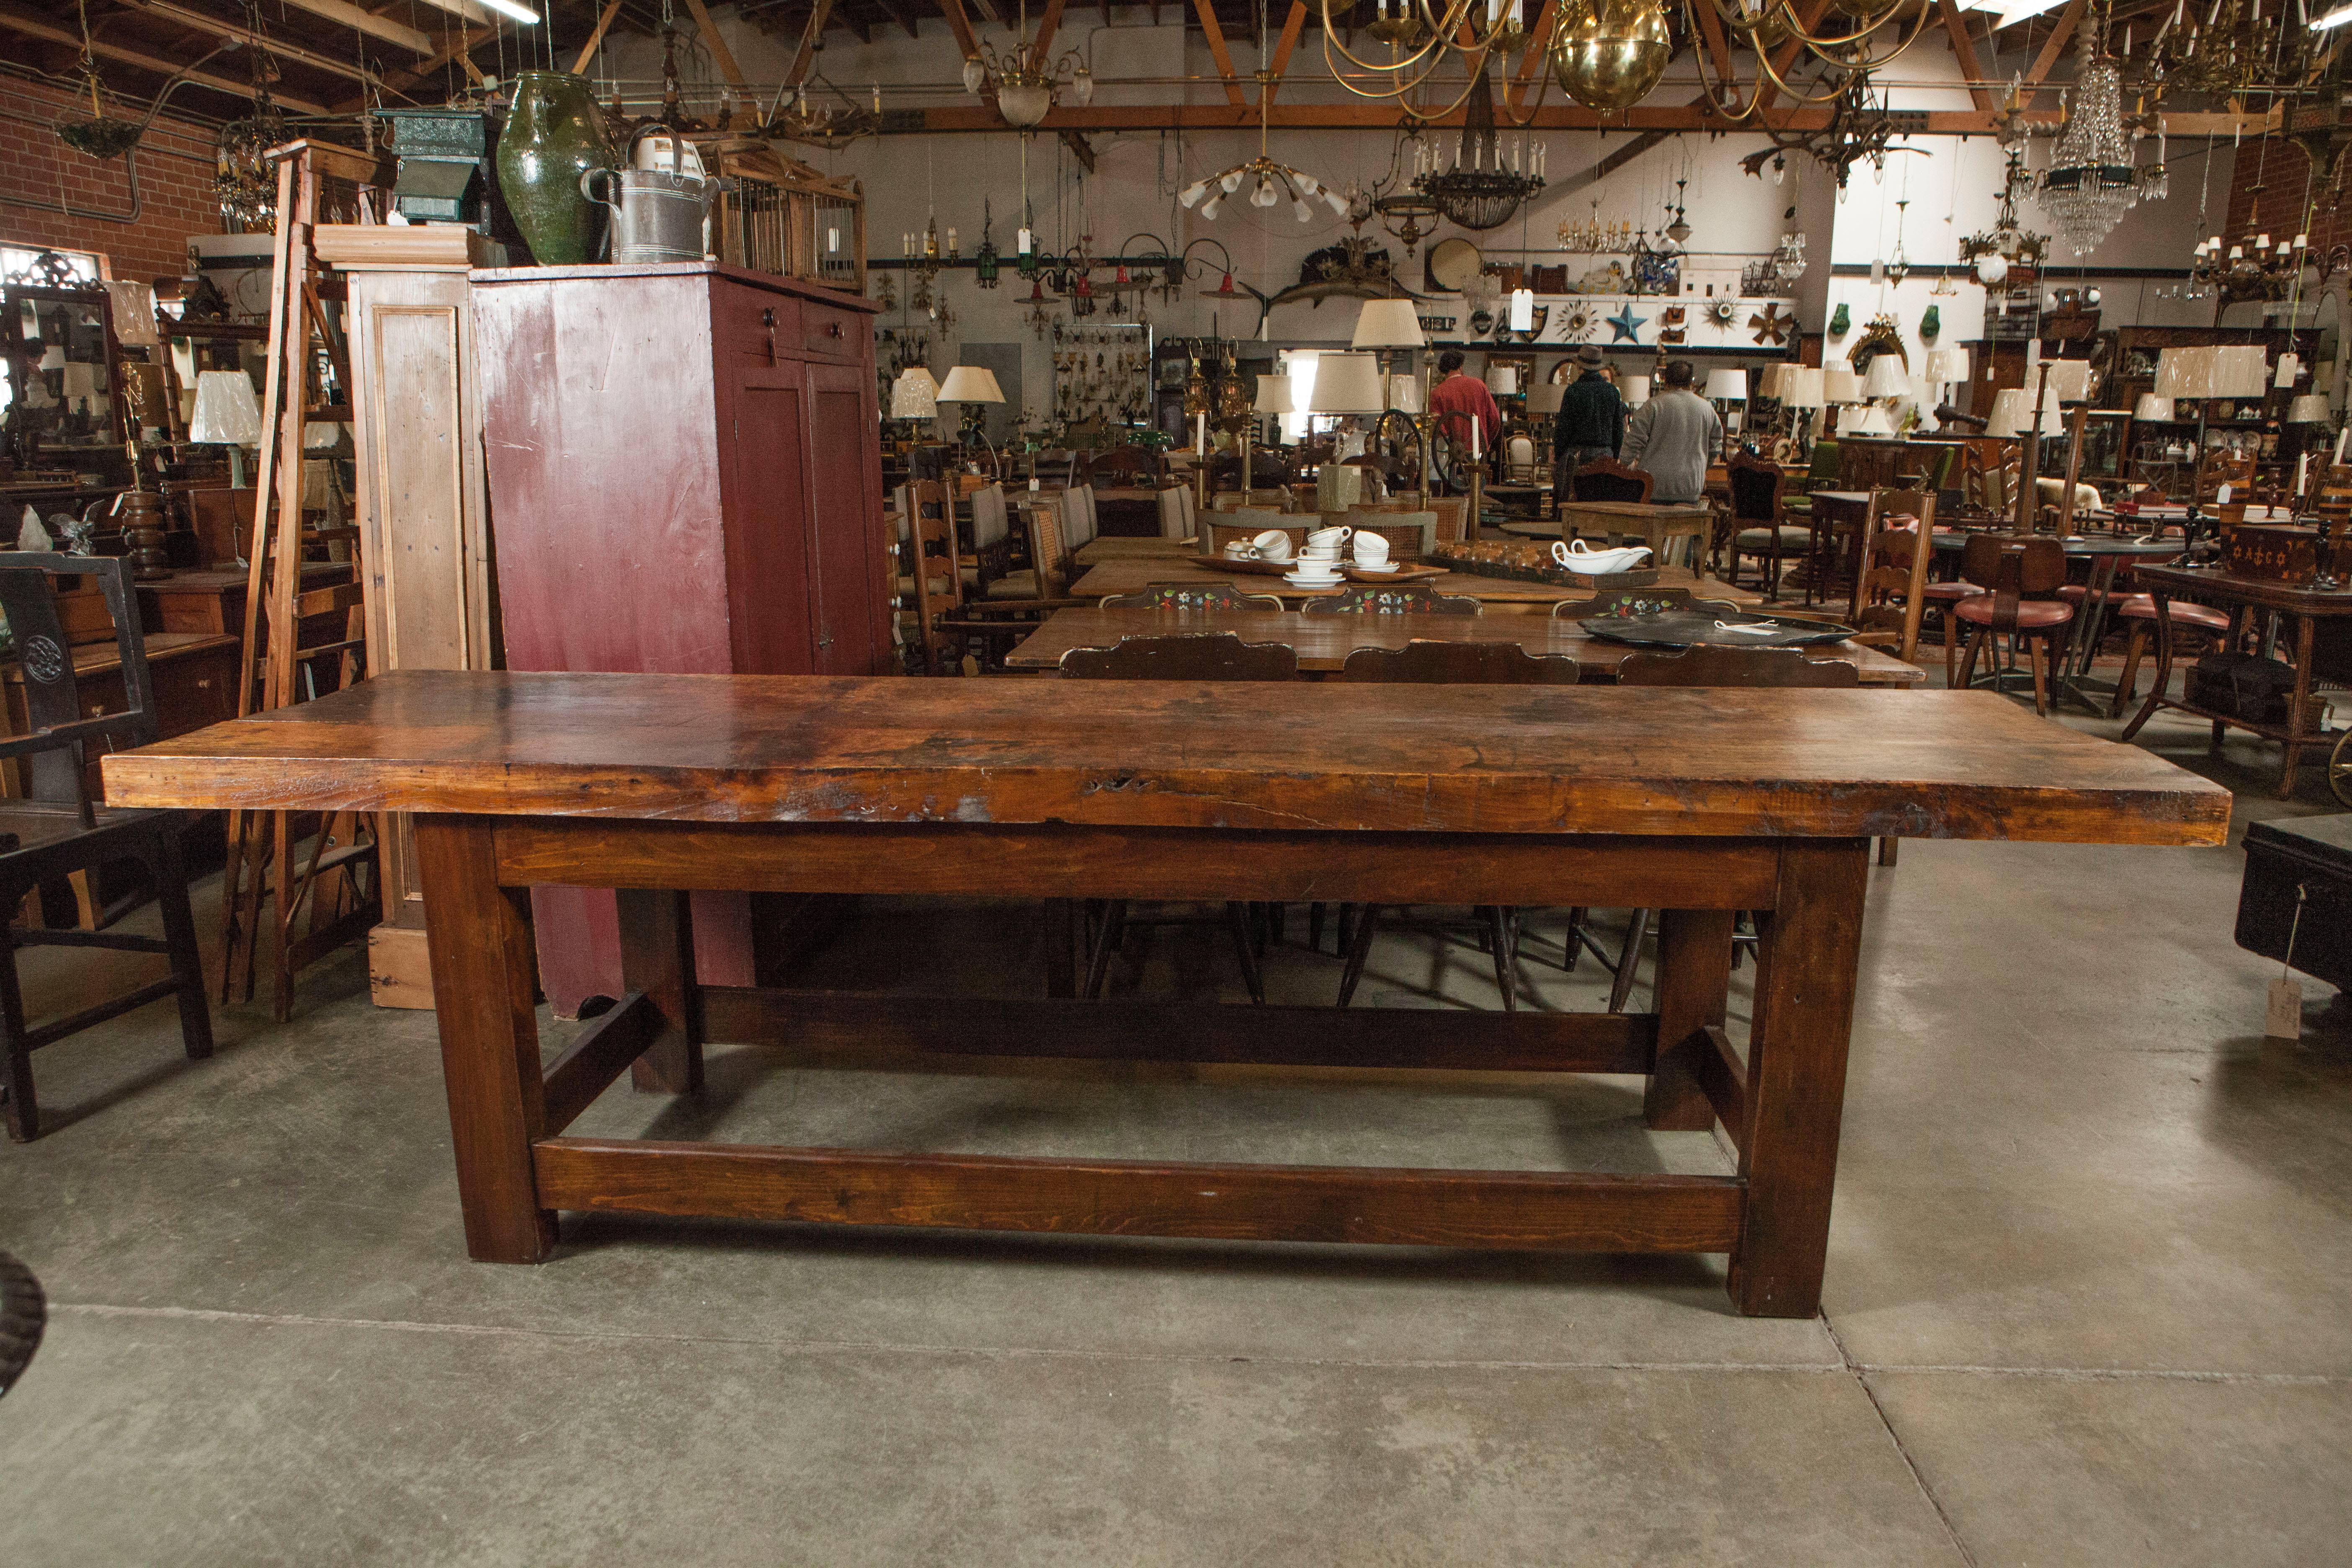 This substantial piece of antique furniture has a two board, 3" thick table top, attractive squared legs and stretcher bars. Thought to have originally been used as a work table this piece would also work well as a dining or console table in a